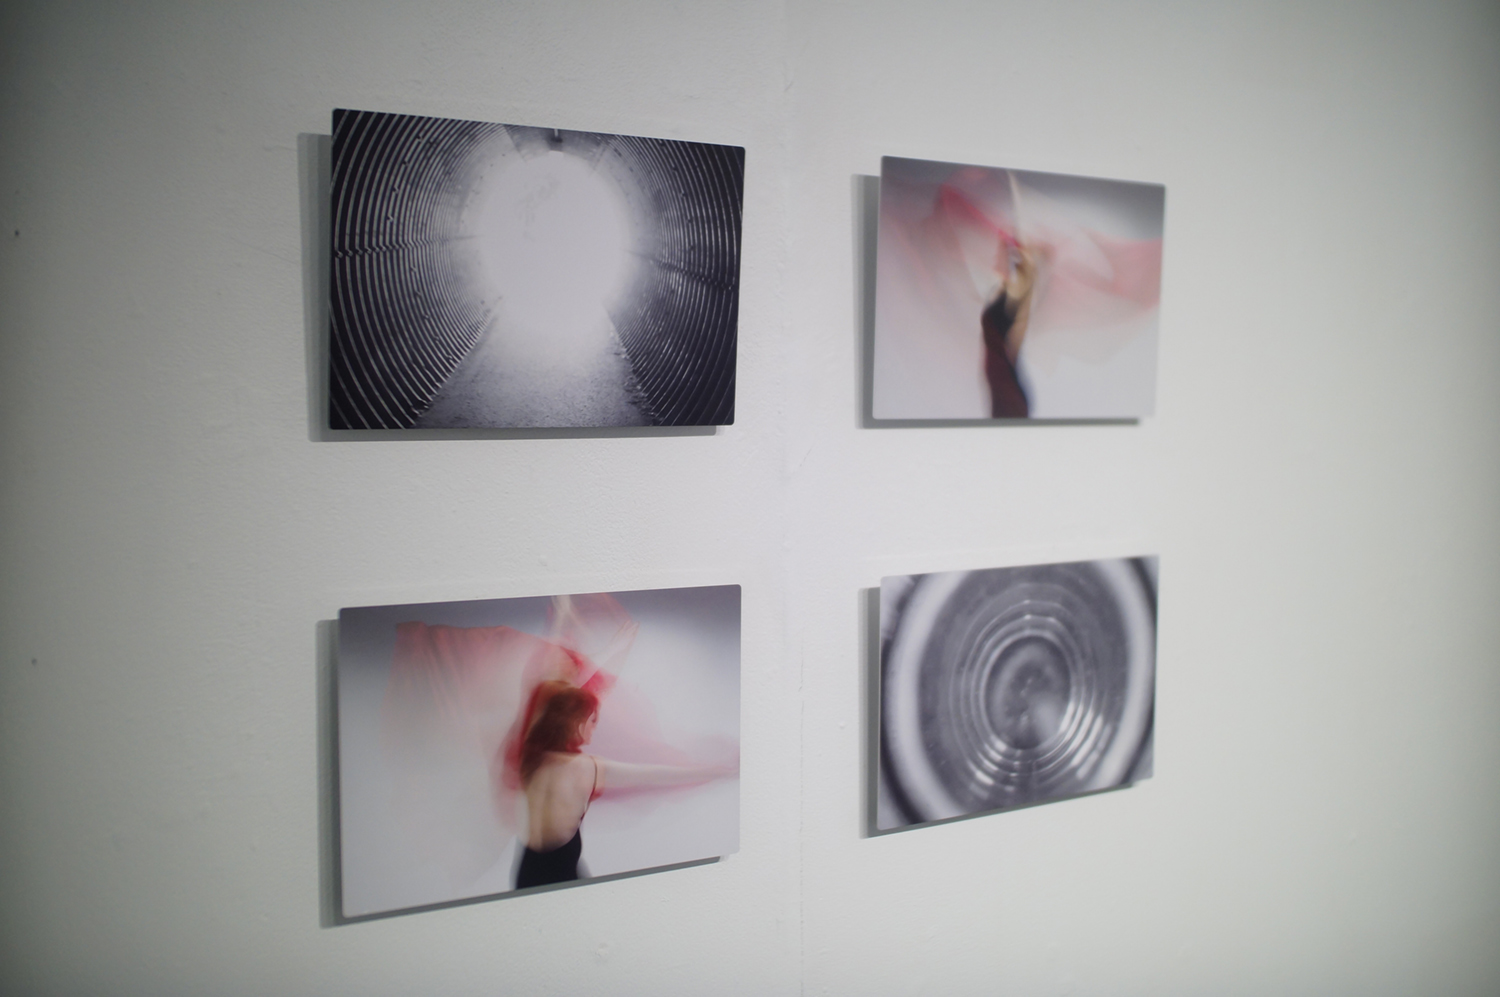 A grid of two-by-two photographs printed on aluminum hanging on a wall. Two look like black and white images of tunnels or portals. The other two are long exposure motion blurred portraits. Image courtesy of Naomi Hutchquist